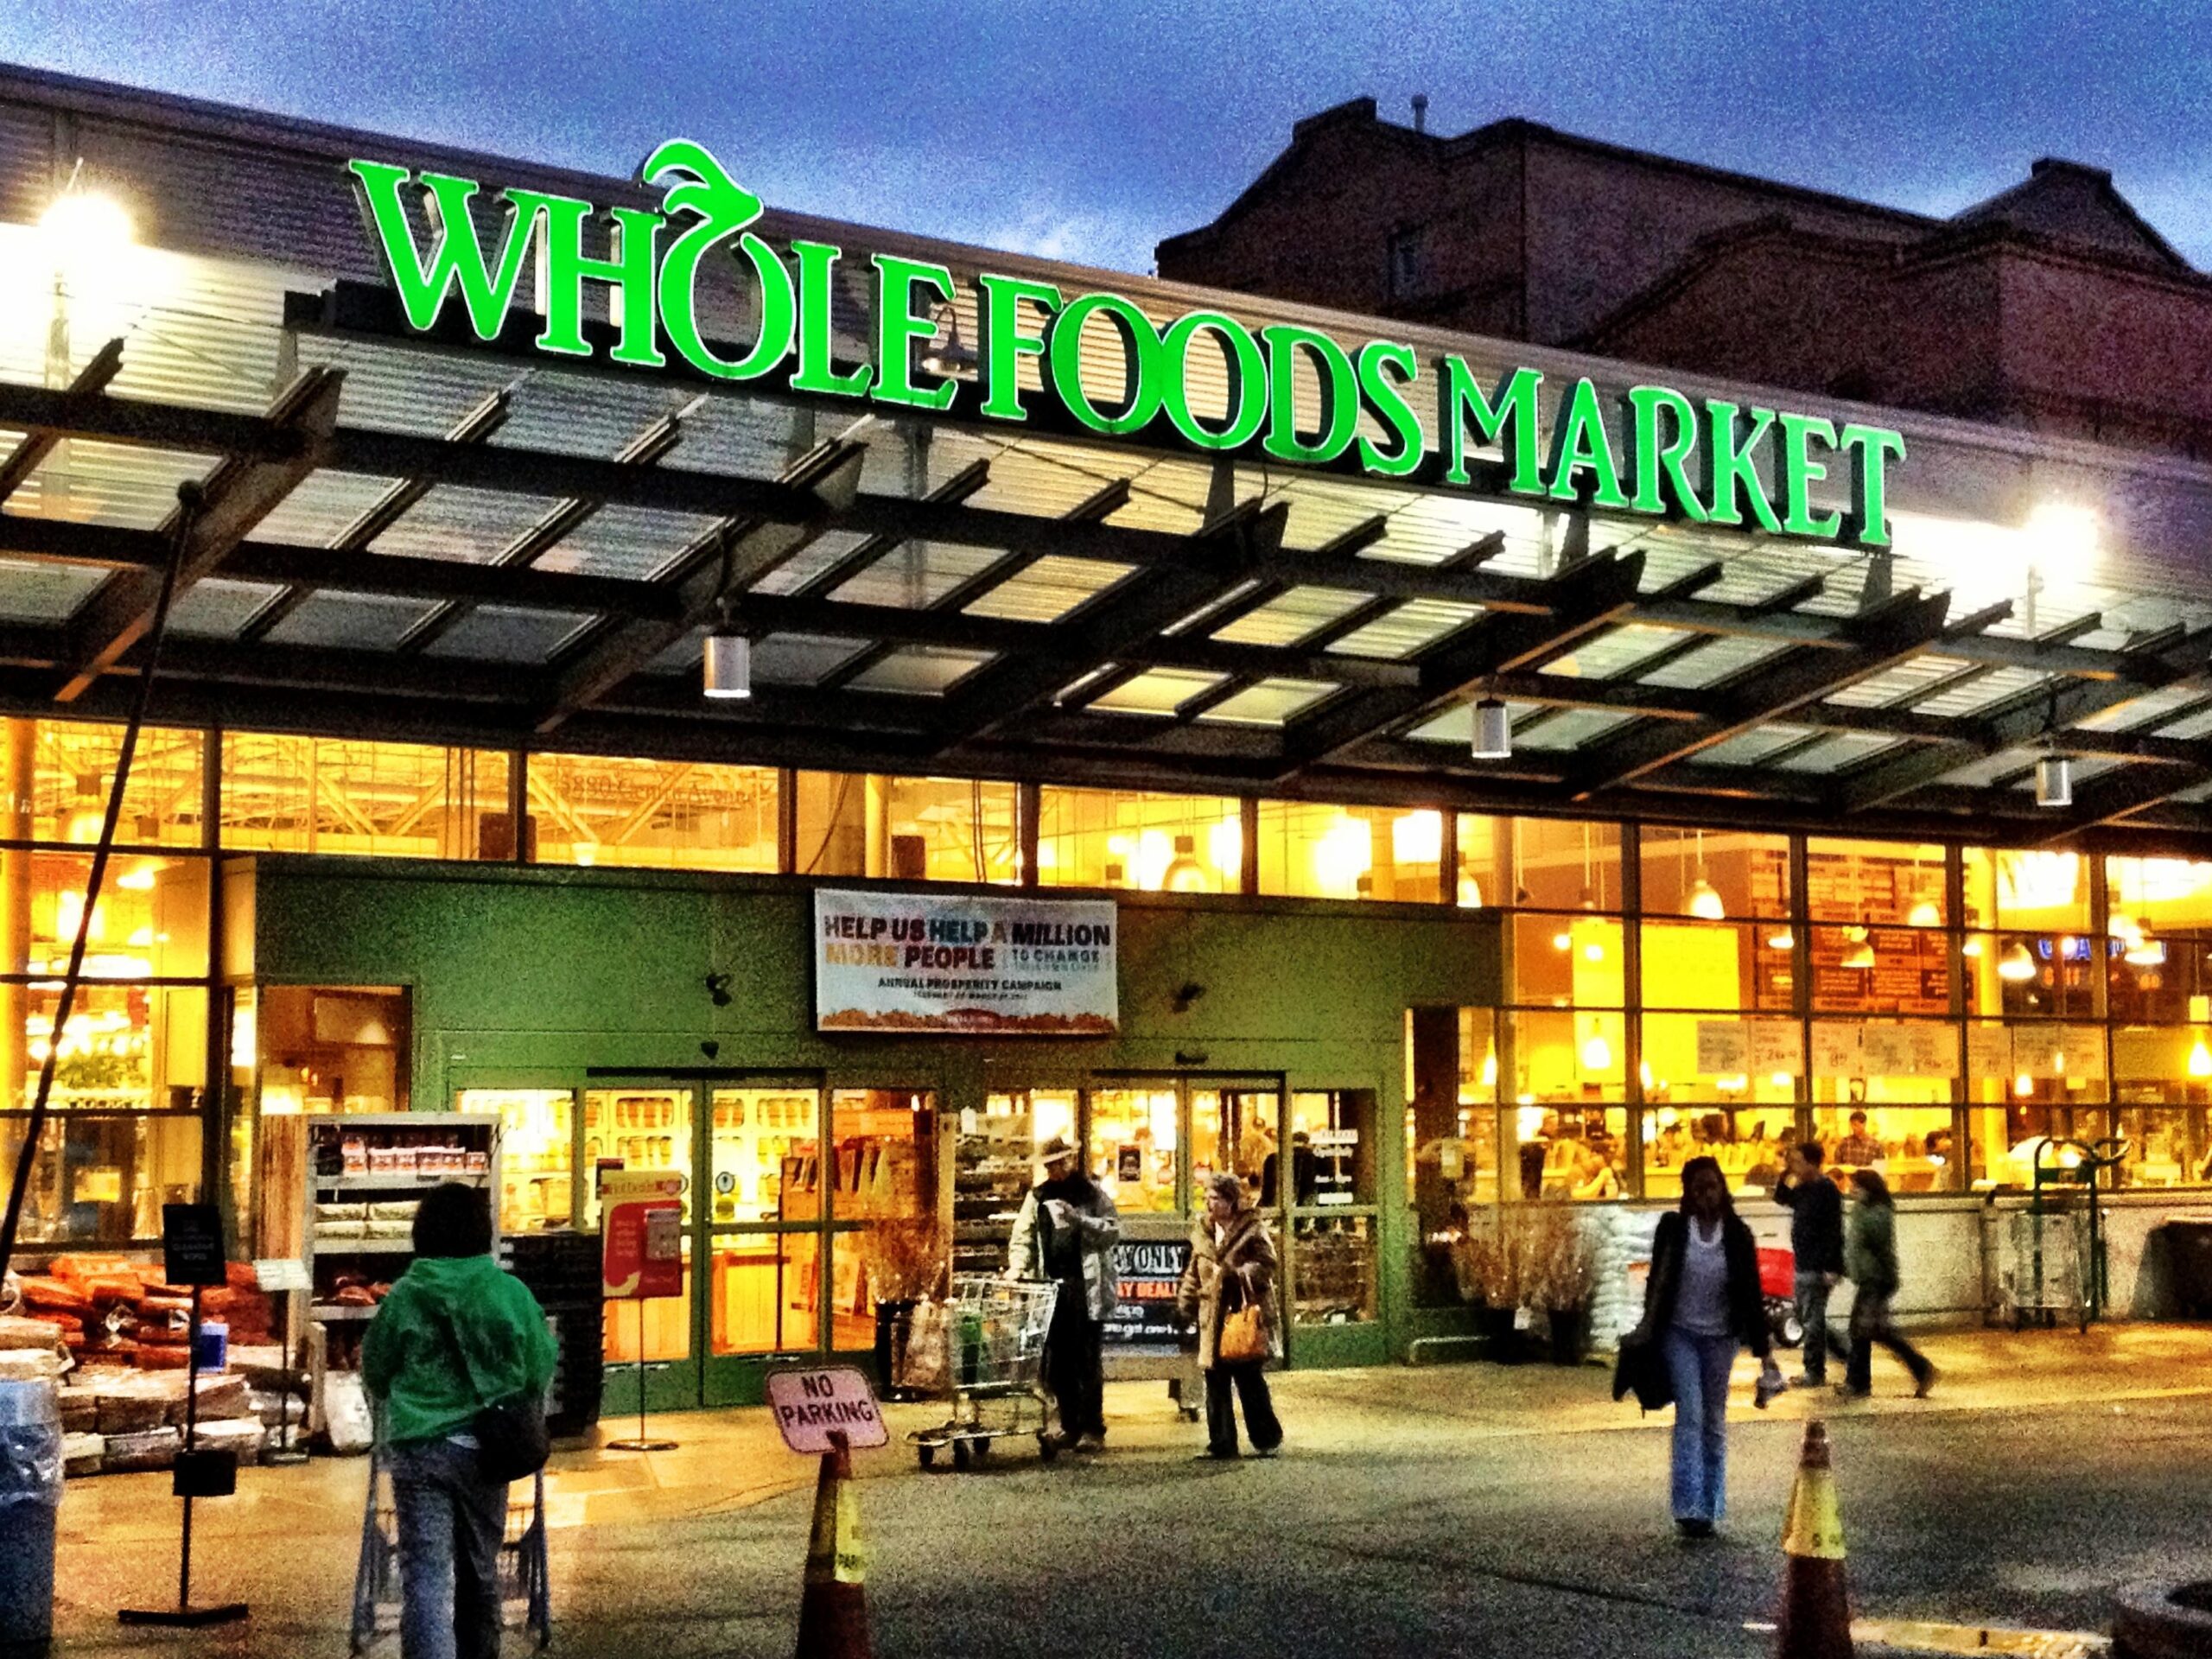 Whole Foods Market Wallpaper Phone